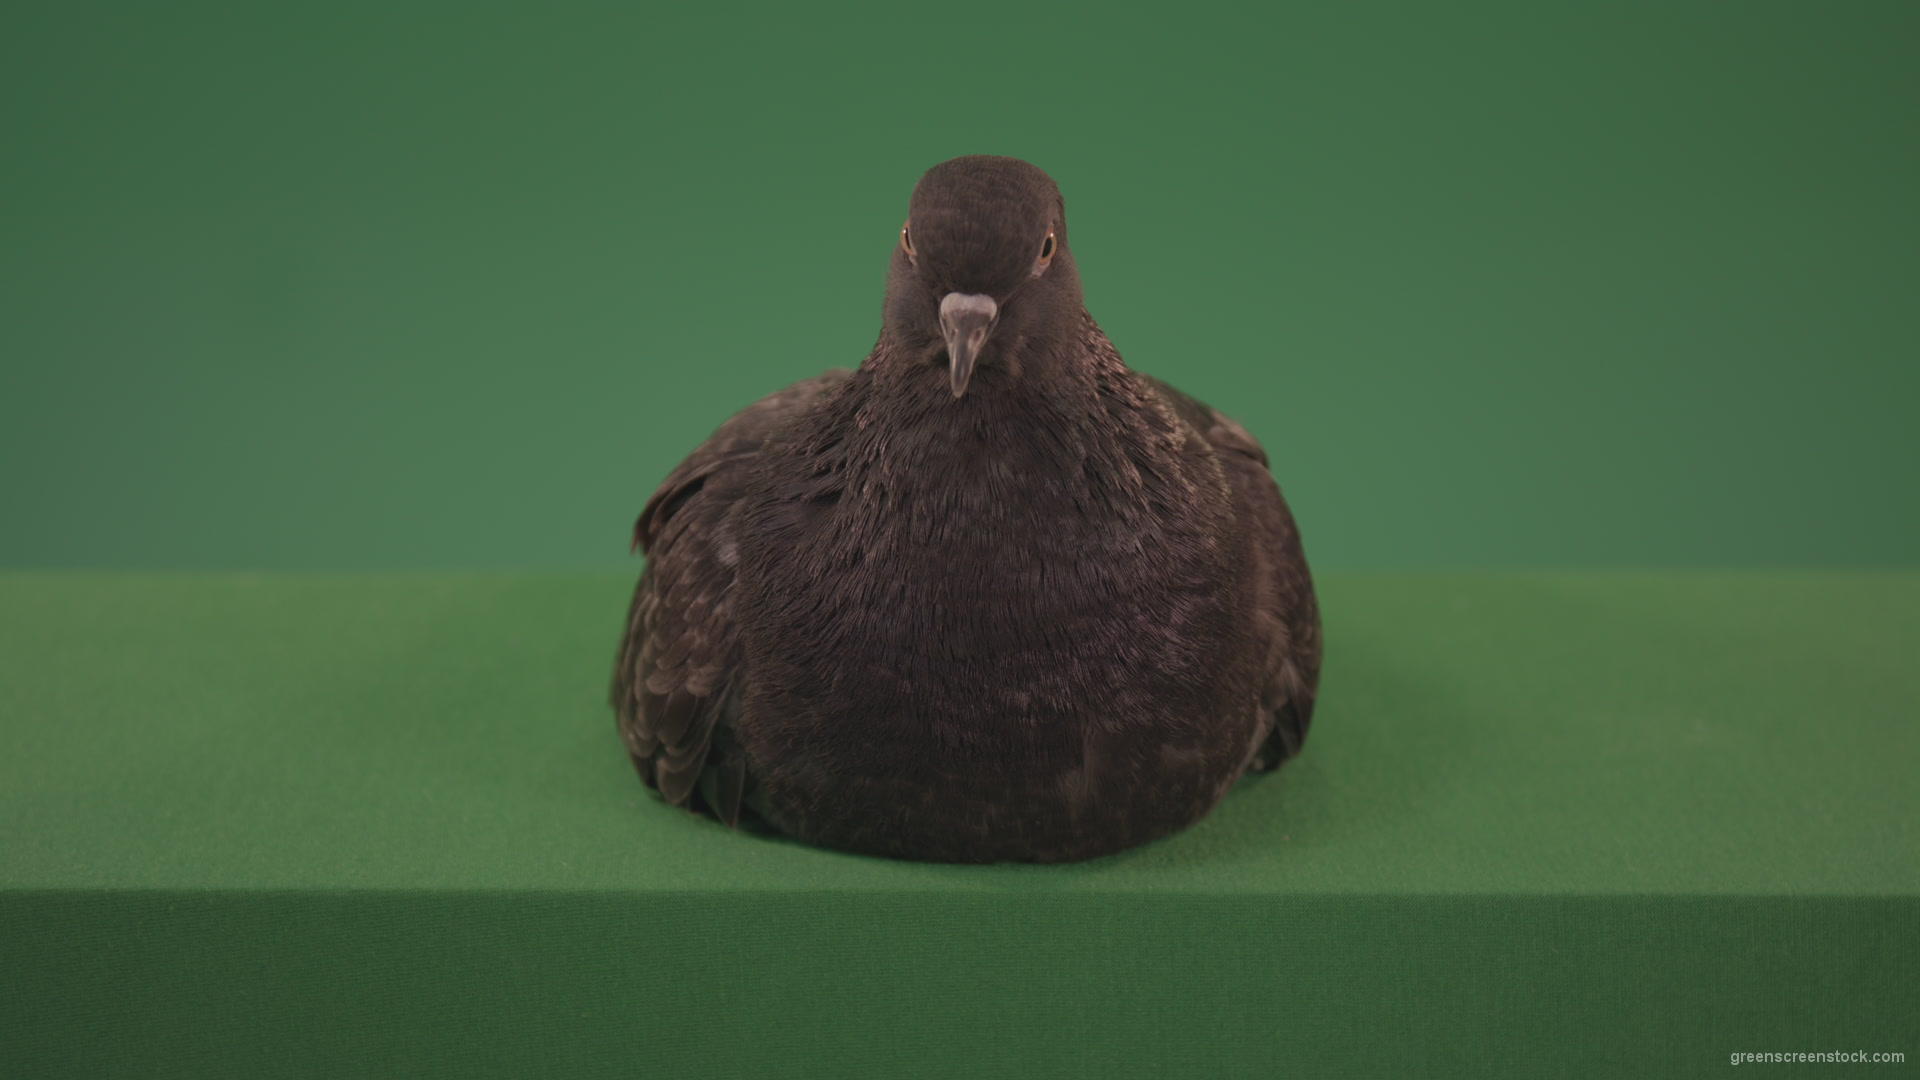 Bird-came-to-rest-staring-around-and-brushing-its-feathers-isolated-on-chromakey-background_001 Green Screen Stock